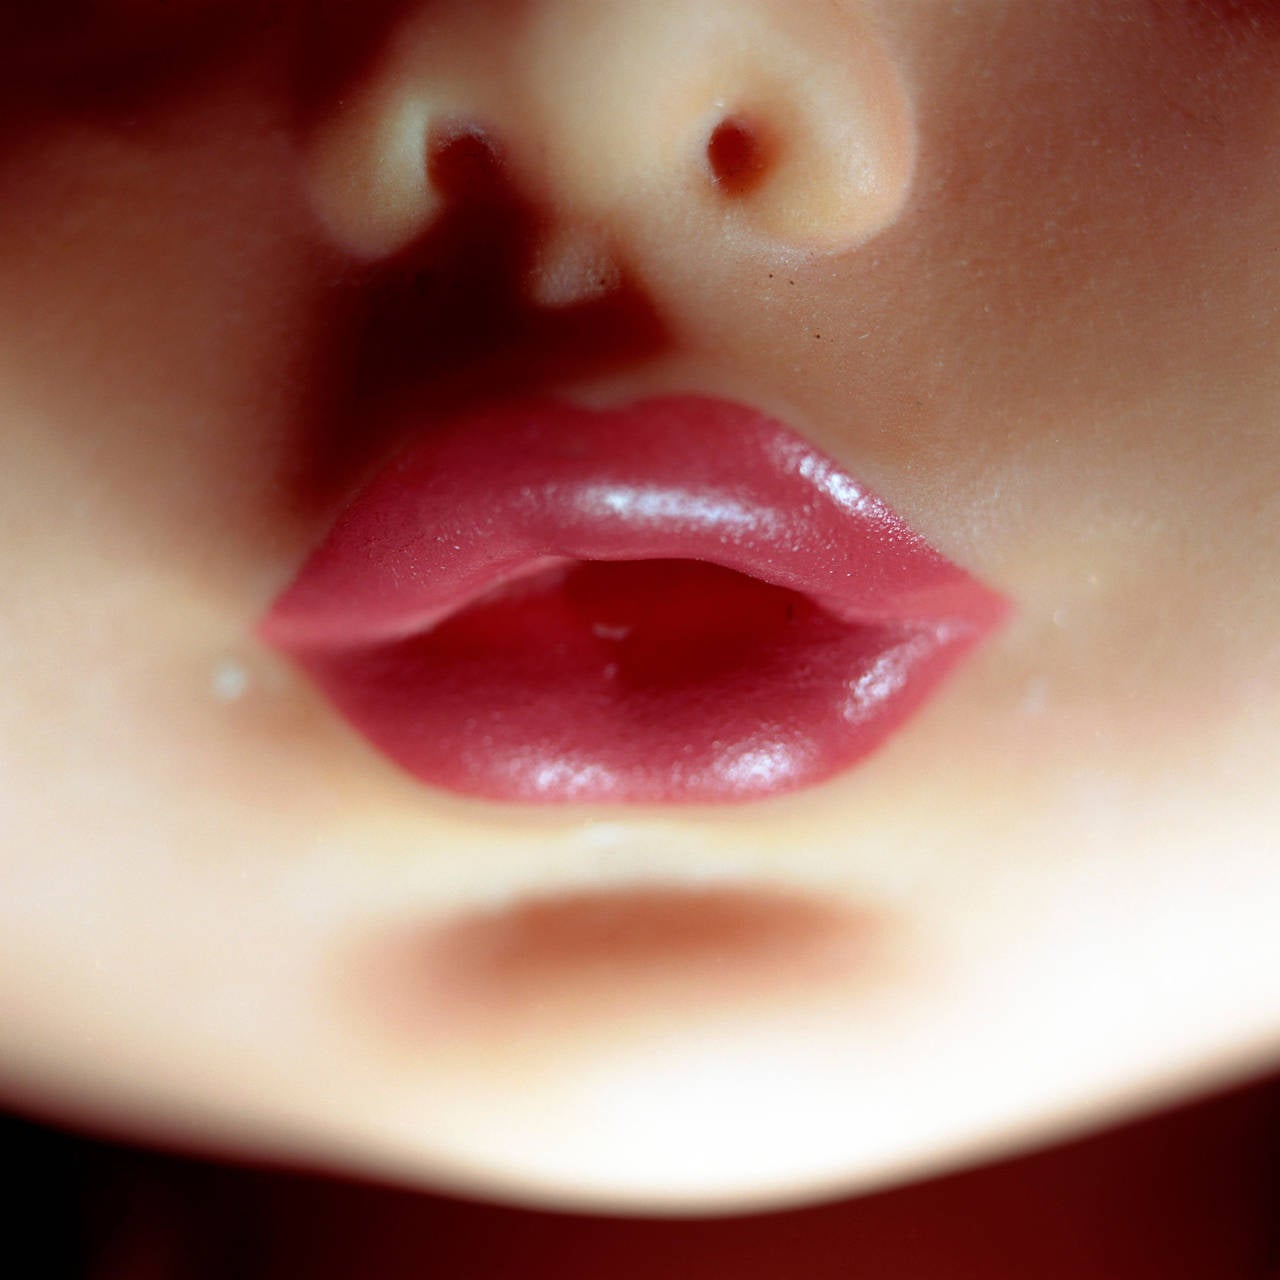 Doll Mouth (lipstick) - Photograph by Diana Thorneycroft